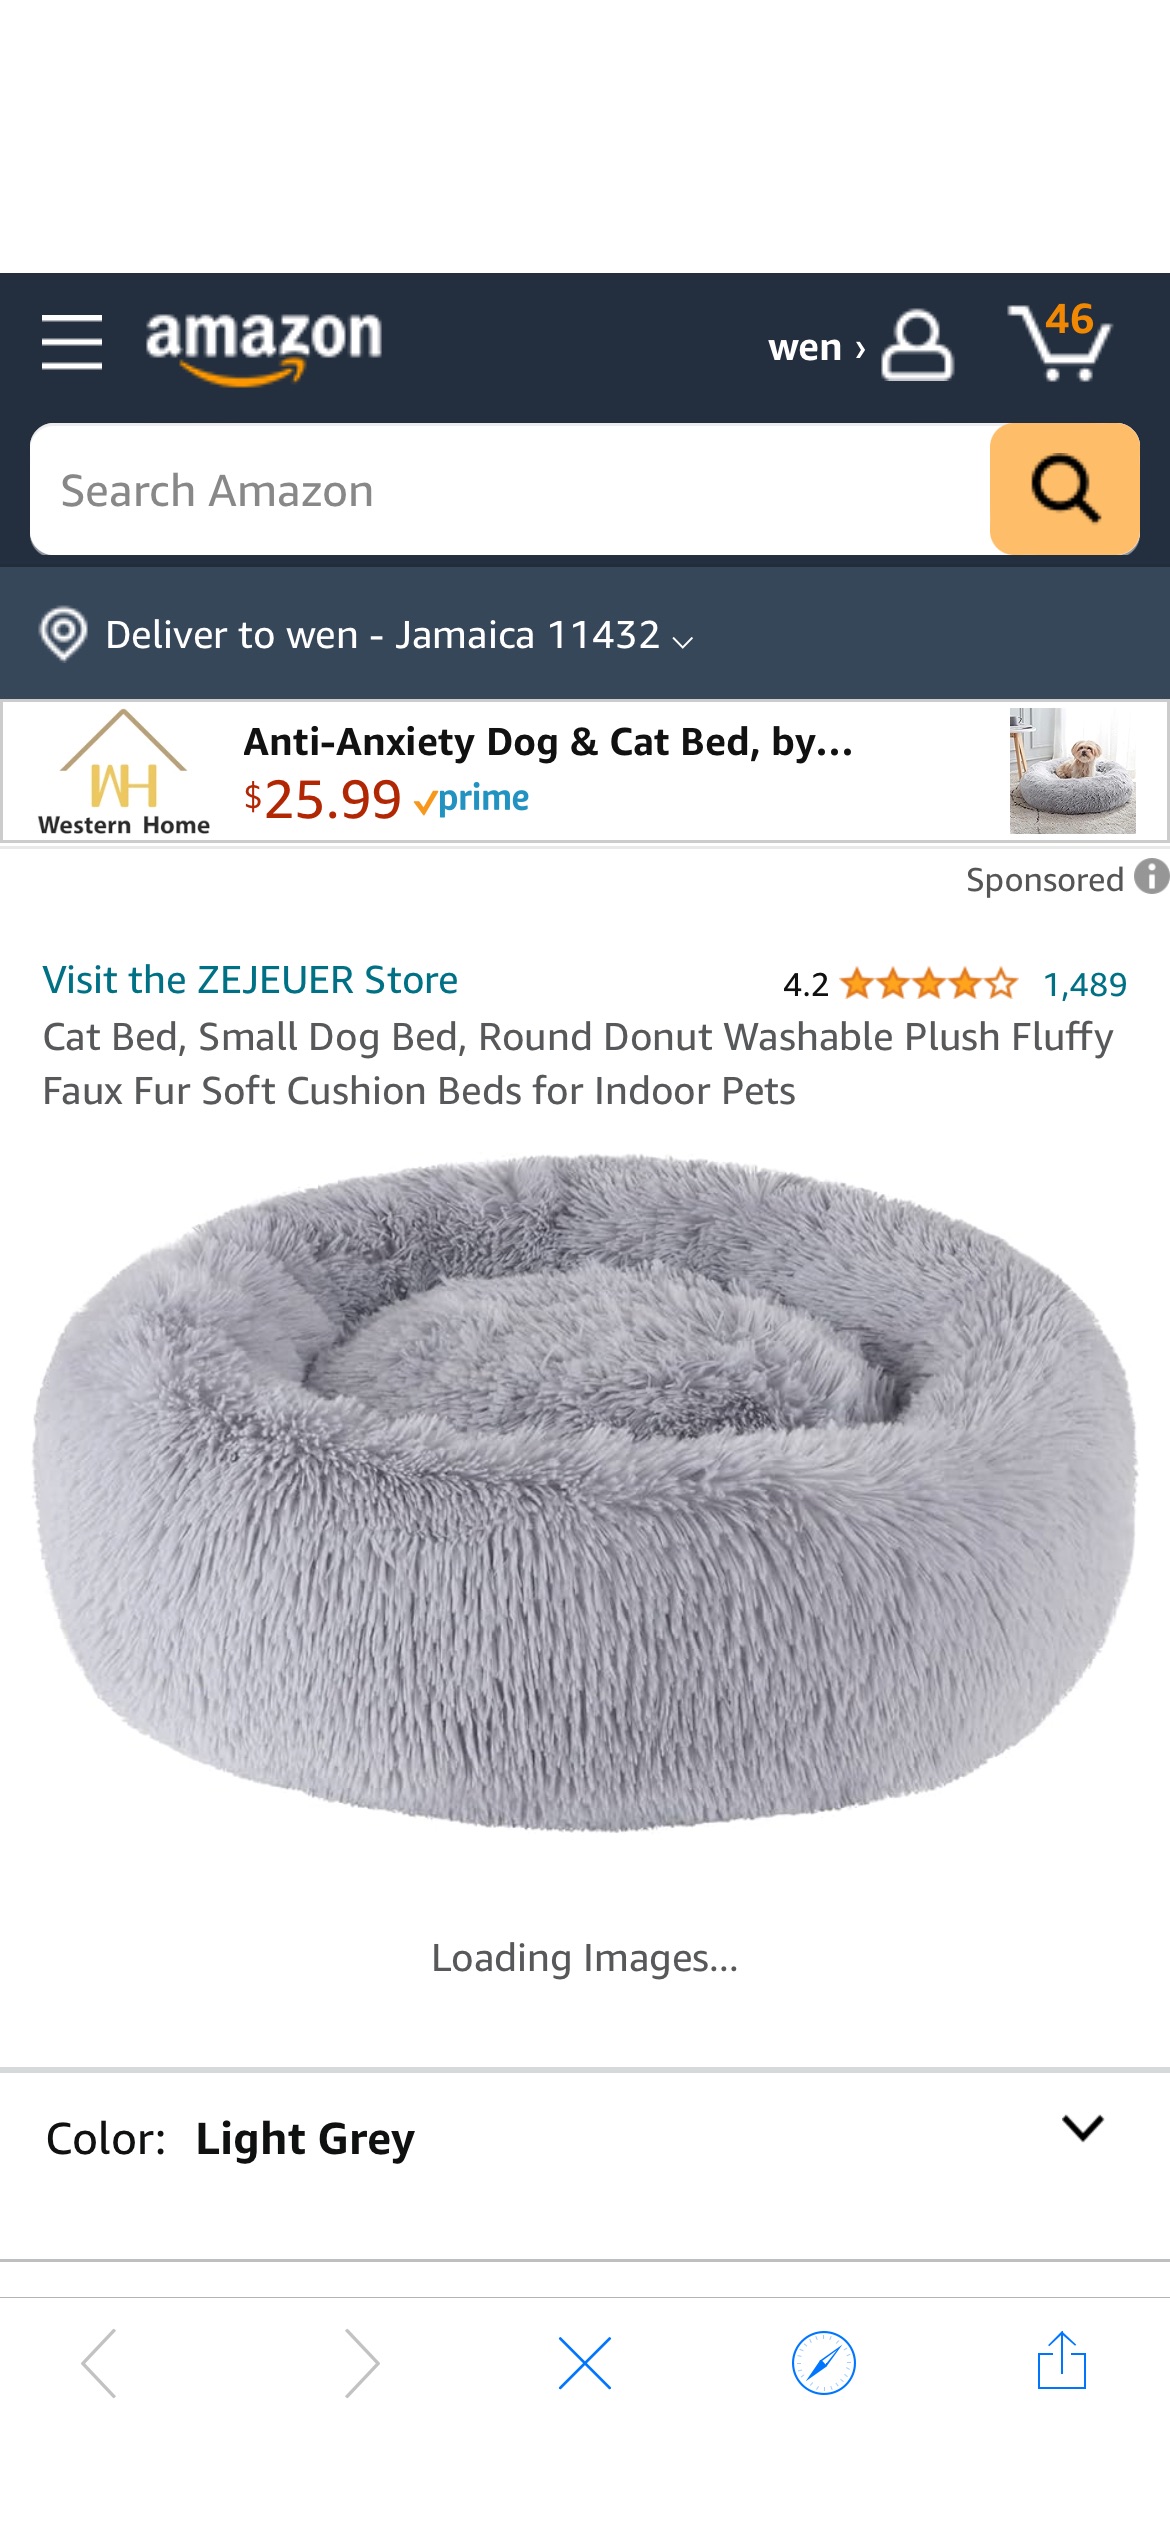 Amazon.com : ZEJEUER Cat Bed, Small Dog Bed, Round Donut Washable Plush Fluffy Faux Fur Soft Cushion Beds for Indoor Pets : Pet Supplies